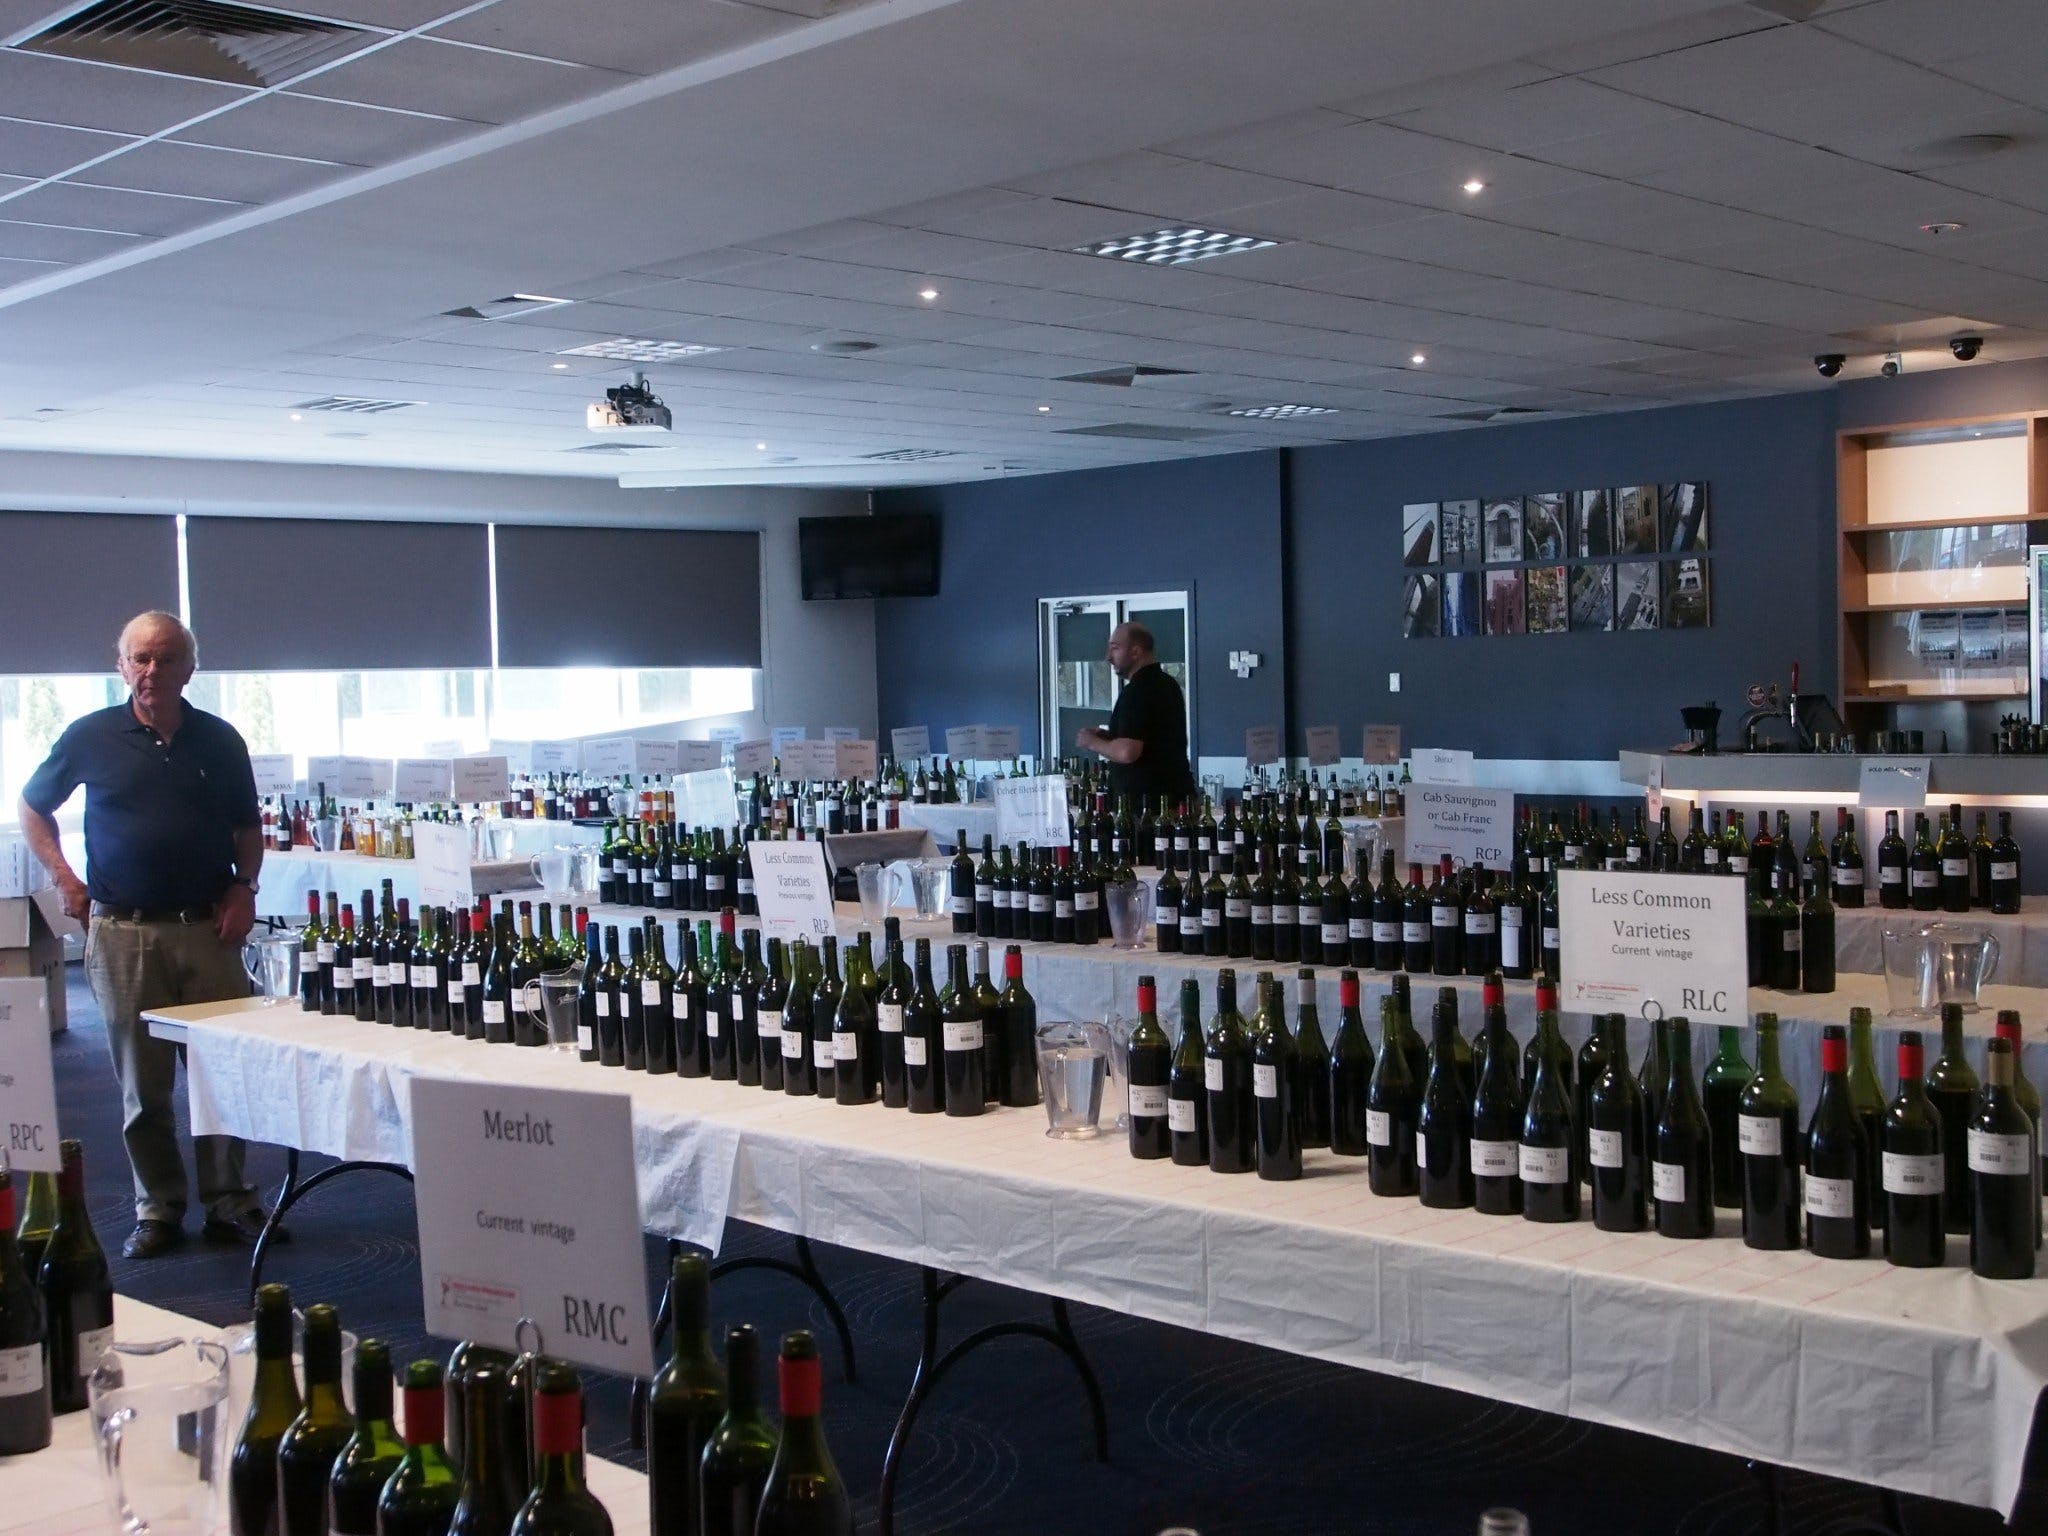 Eltham and District Wine Guild Annual Wine Show - 51st Annual Show - Lismore Accommodation